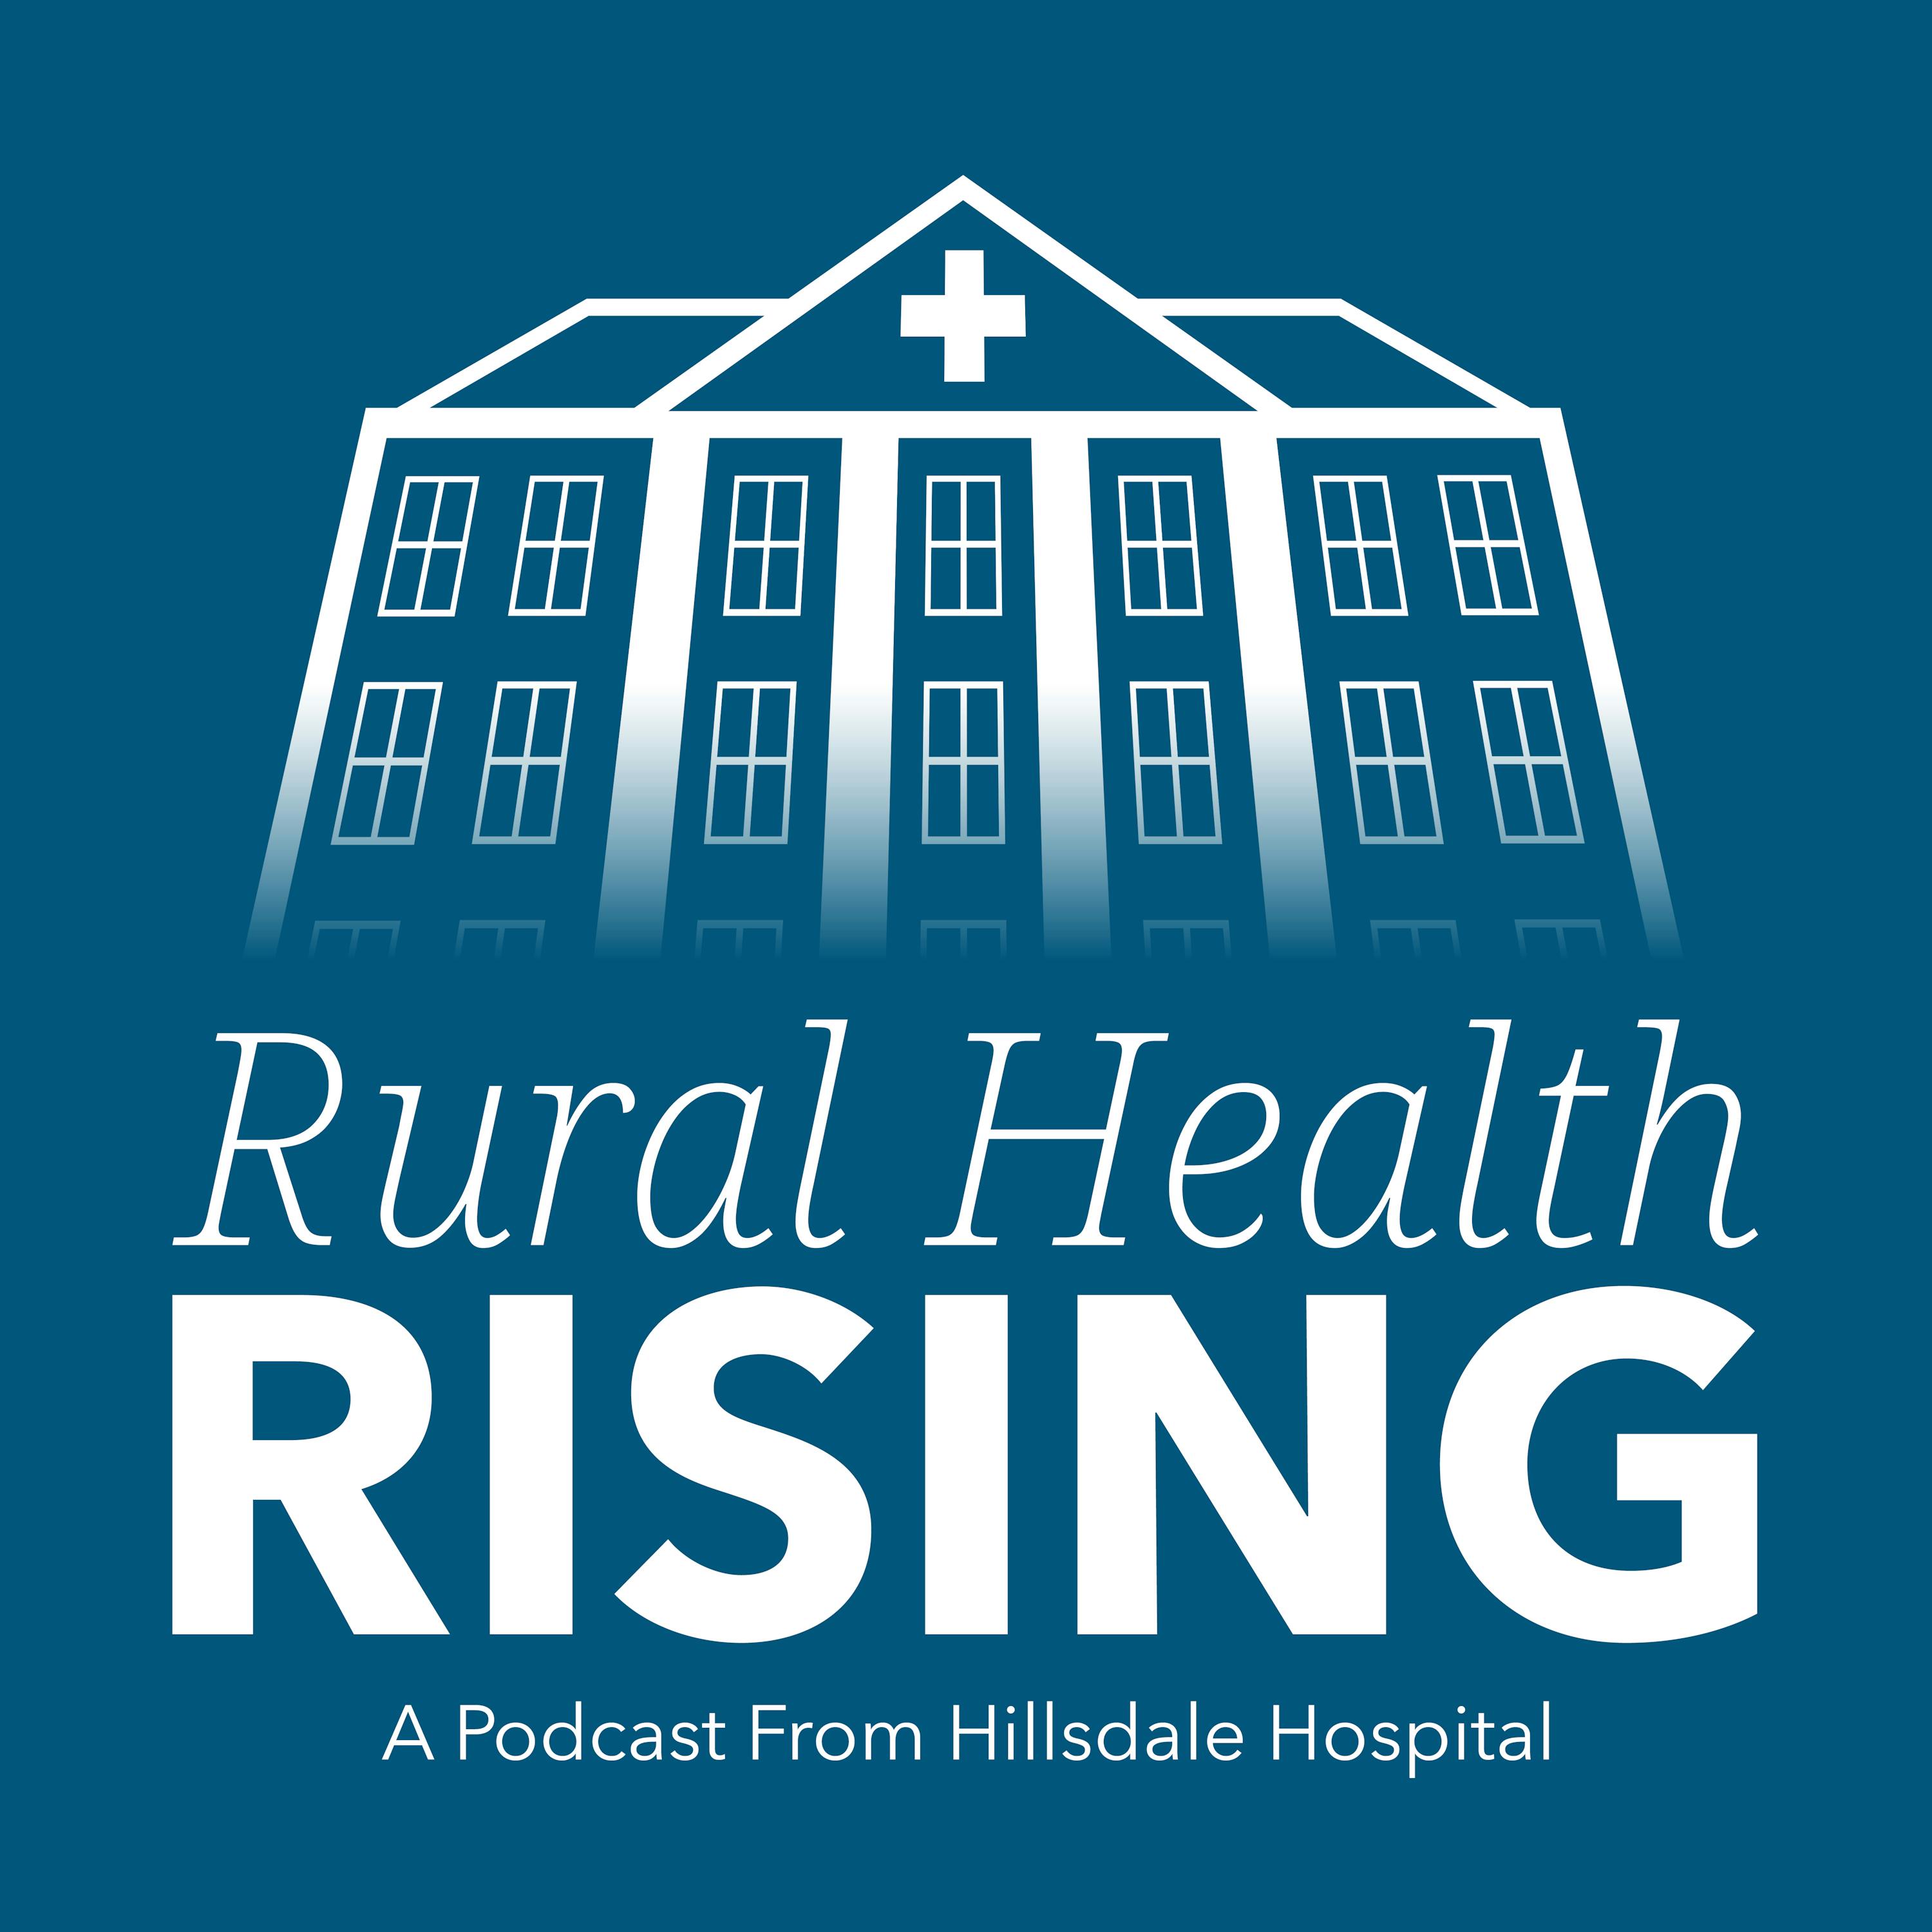 Episode 40: Virtual Hospital During COVID-19